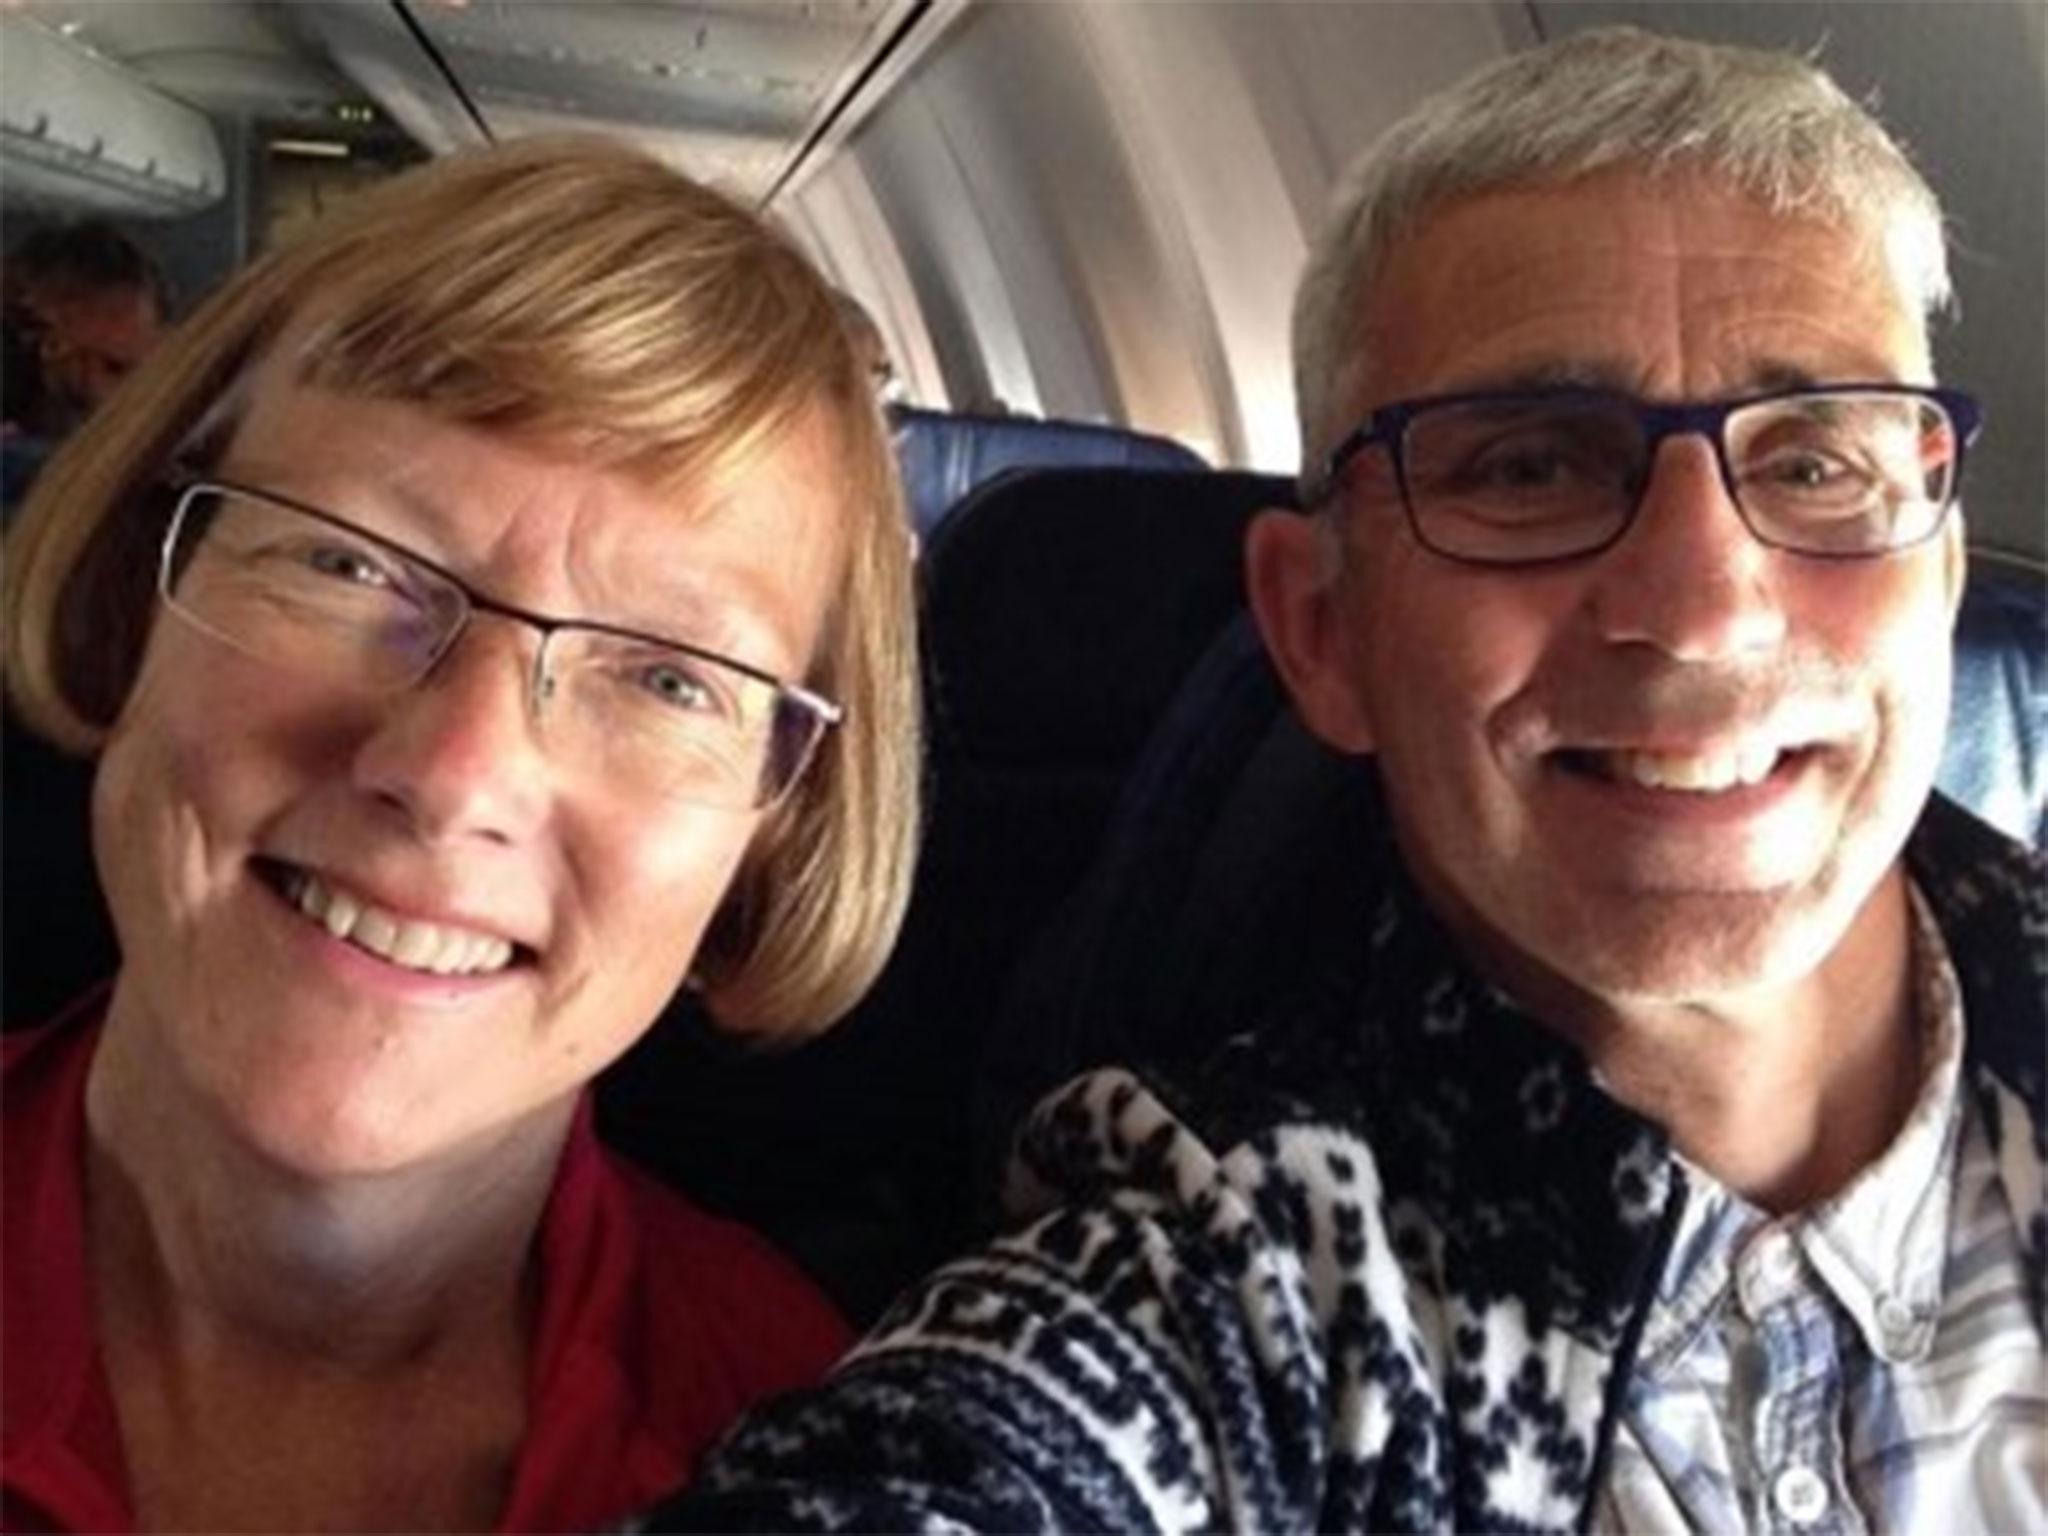 Roger Stotesbury was in the last few weeks of his travels around the world with his wife Hilary